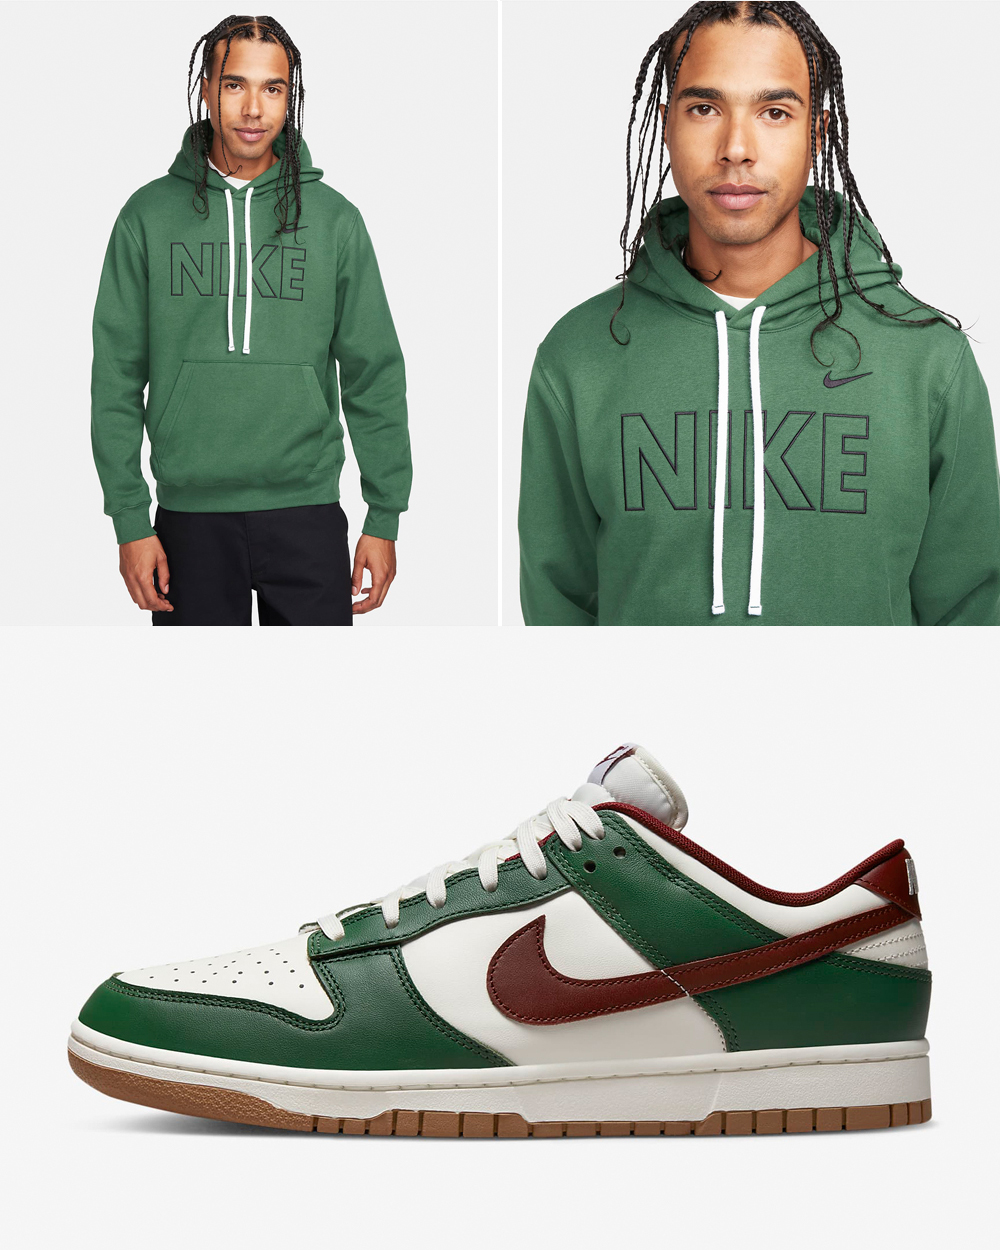 Nike-Dunk-Low-Gorge-Green-Hoodie-Outfit-2